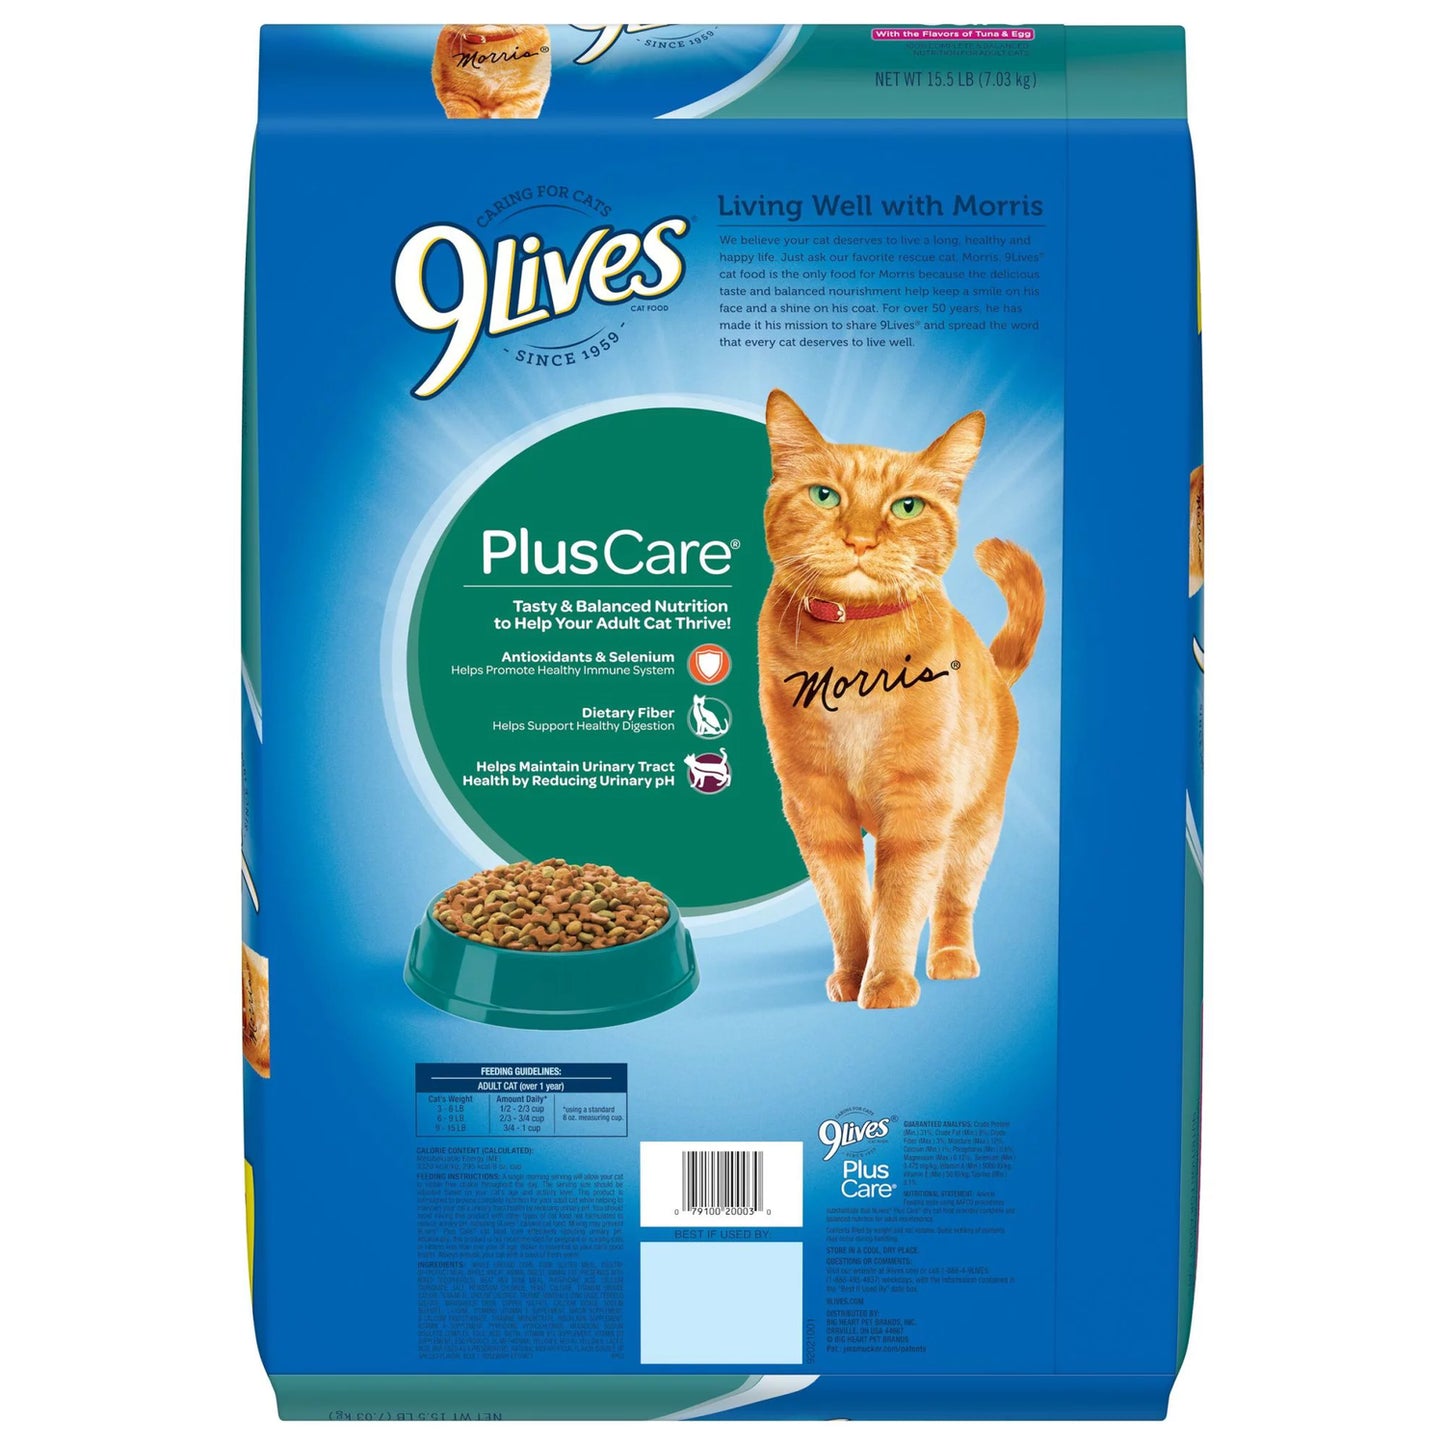 9Lives plus Care Dry Cat Food with Tuna & Egg Flavors, 15.5 Lb Bag